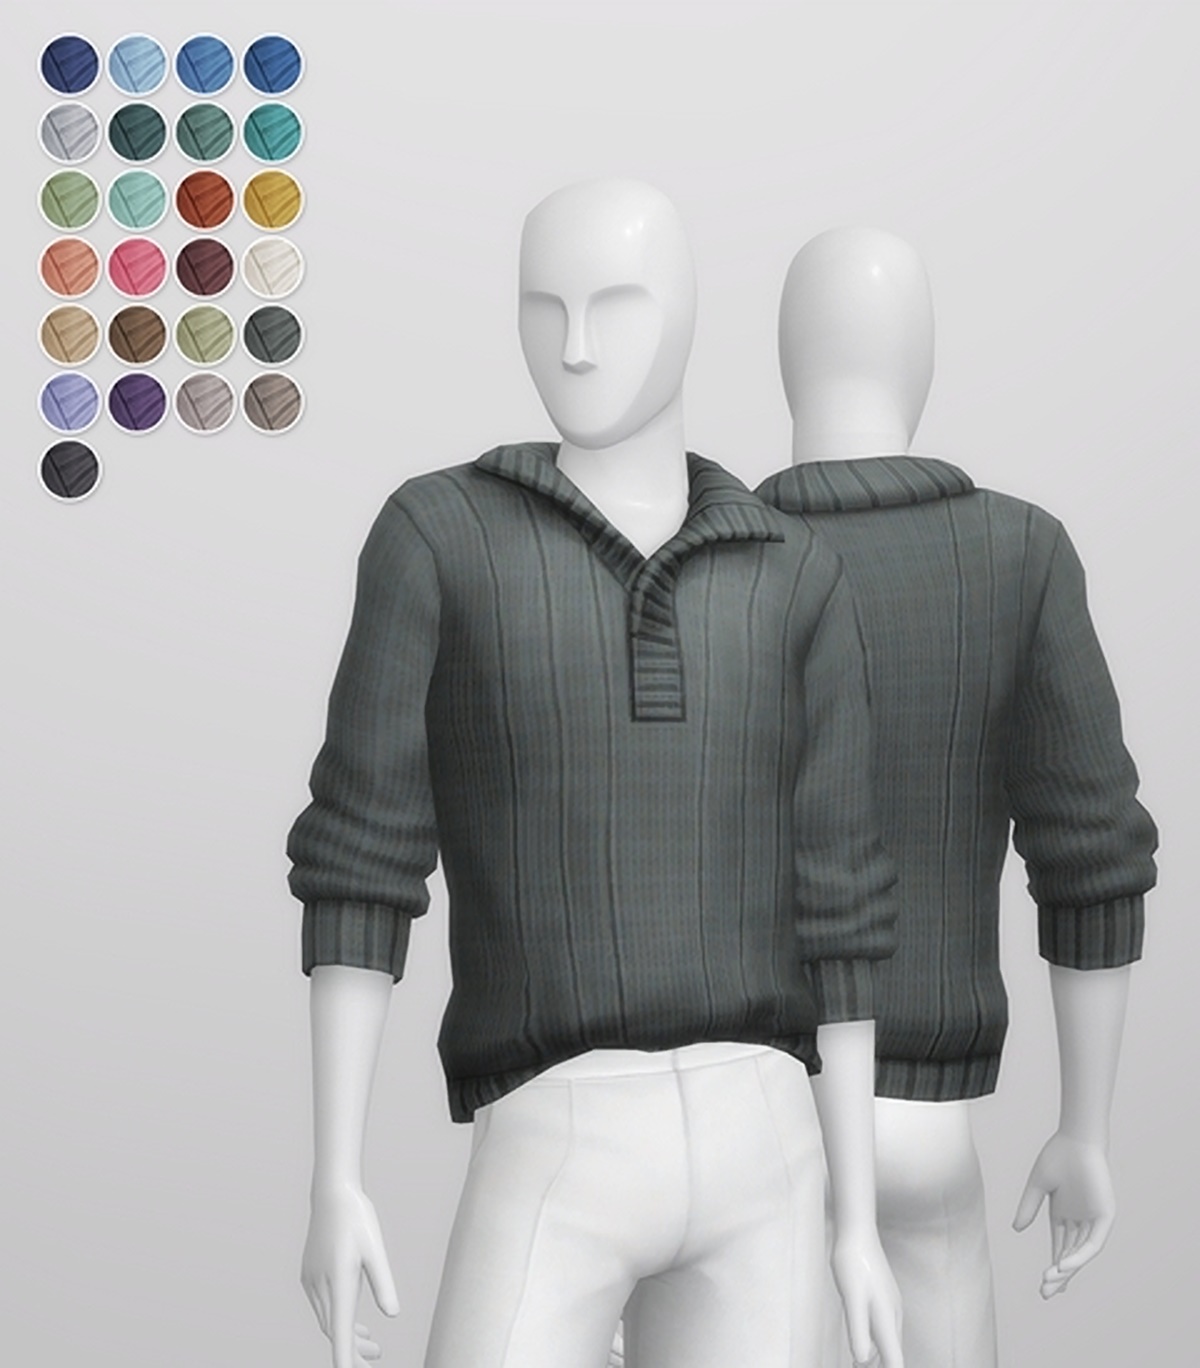 Basic Sweater VI/1 M from Rusty Nail • Sims 4 Downloads